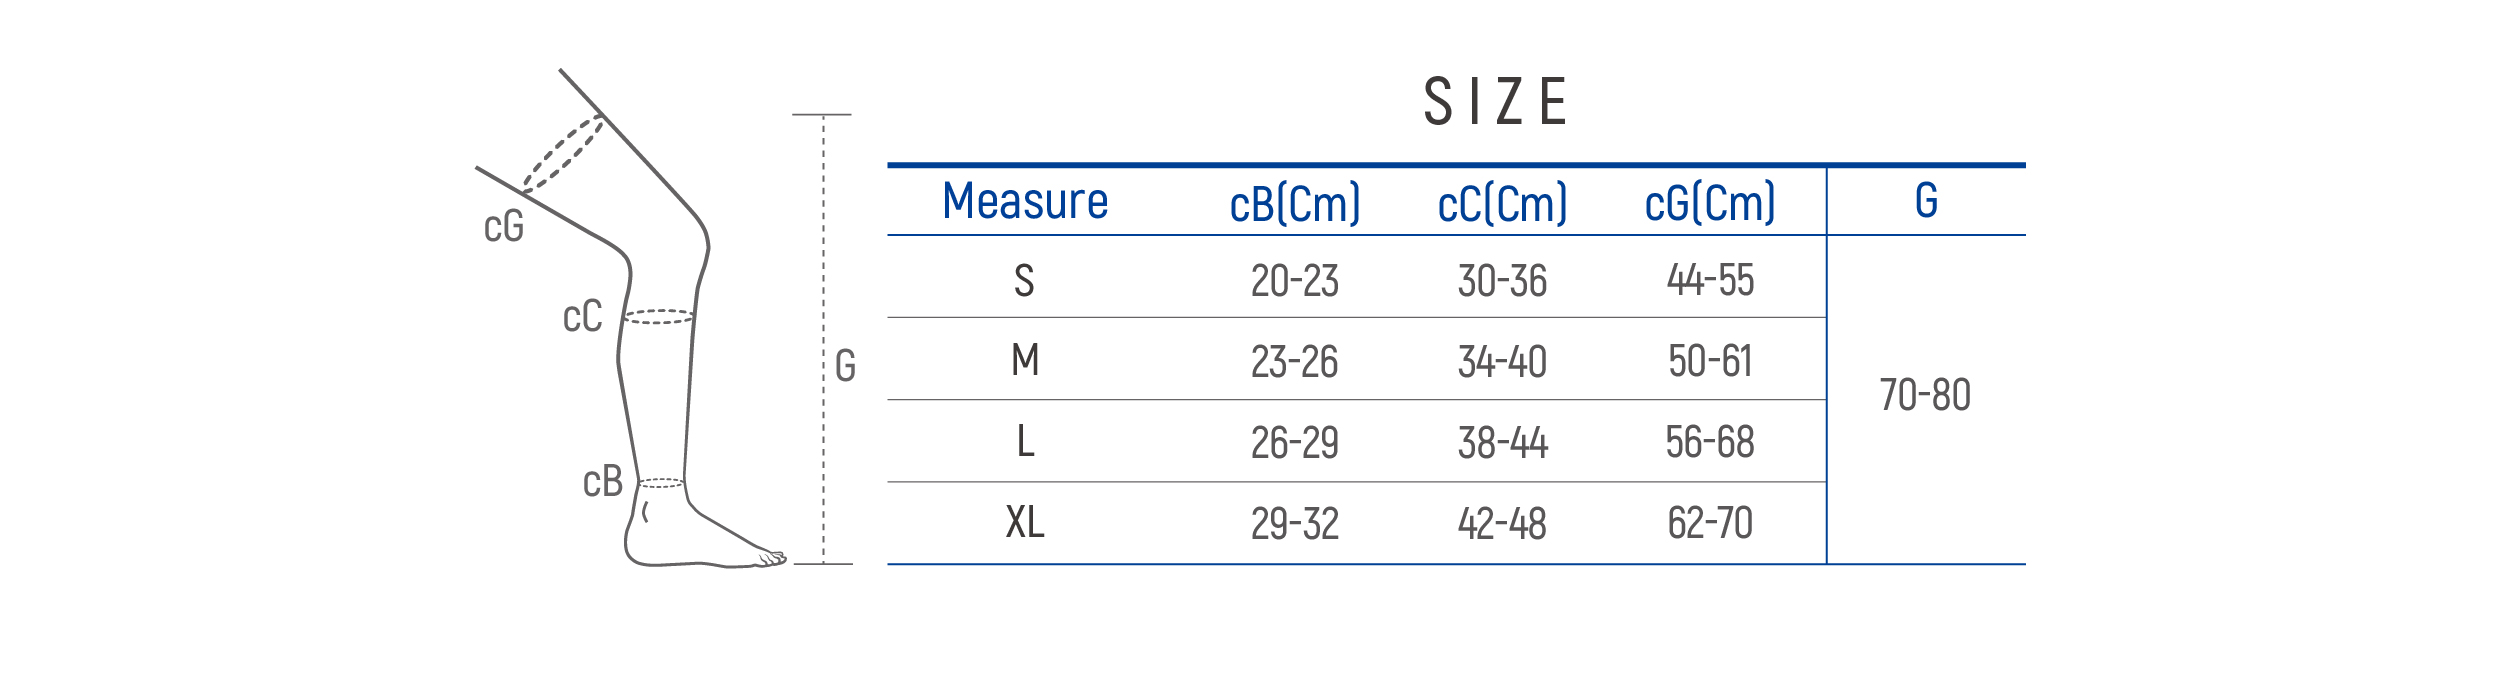 DR-A061-1 Size table image